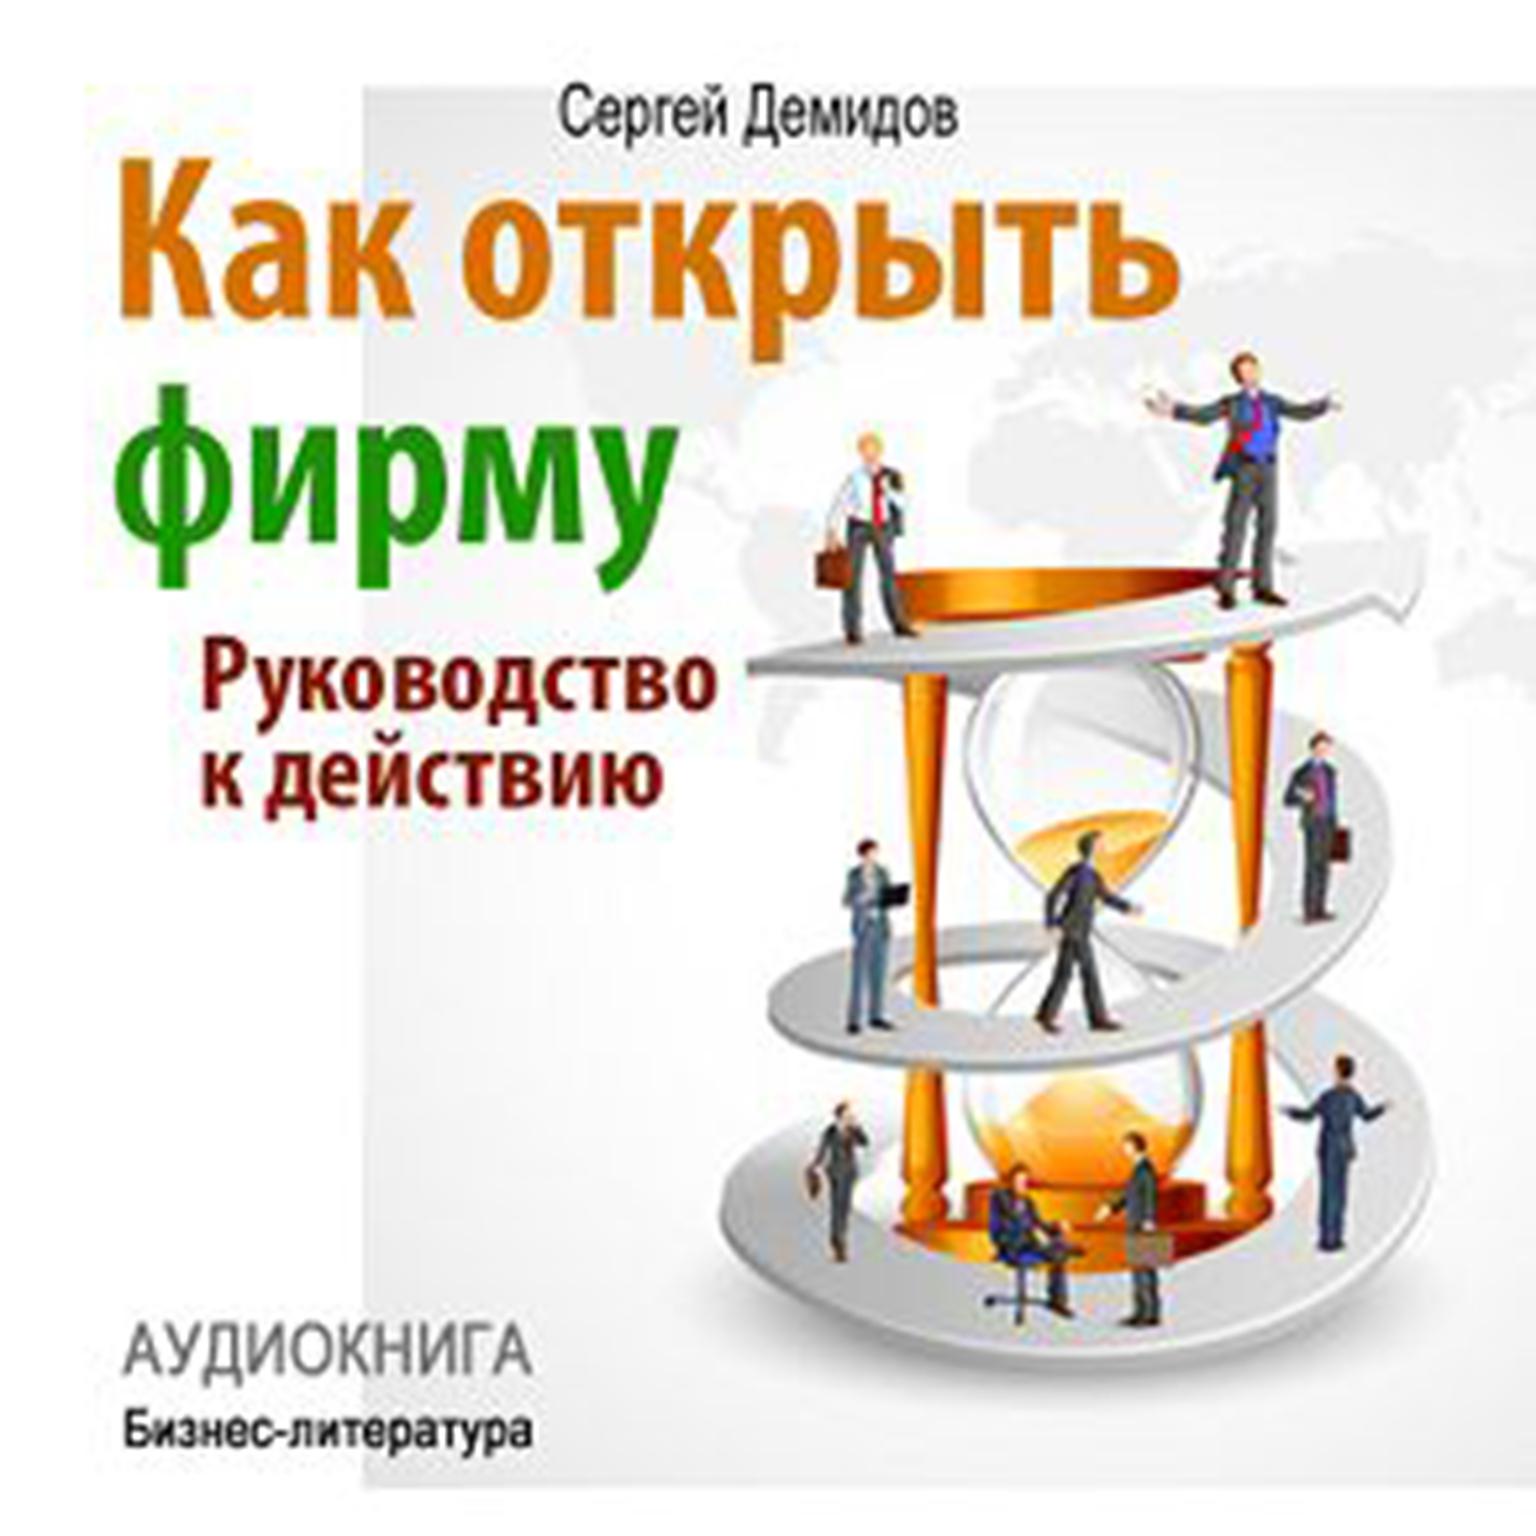 How to Establish a Company [Russian Edition] Audiobook, by Sergey Demidov